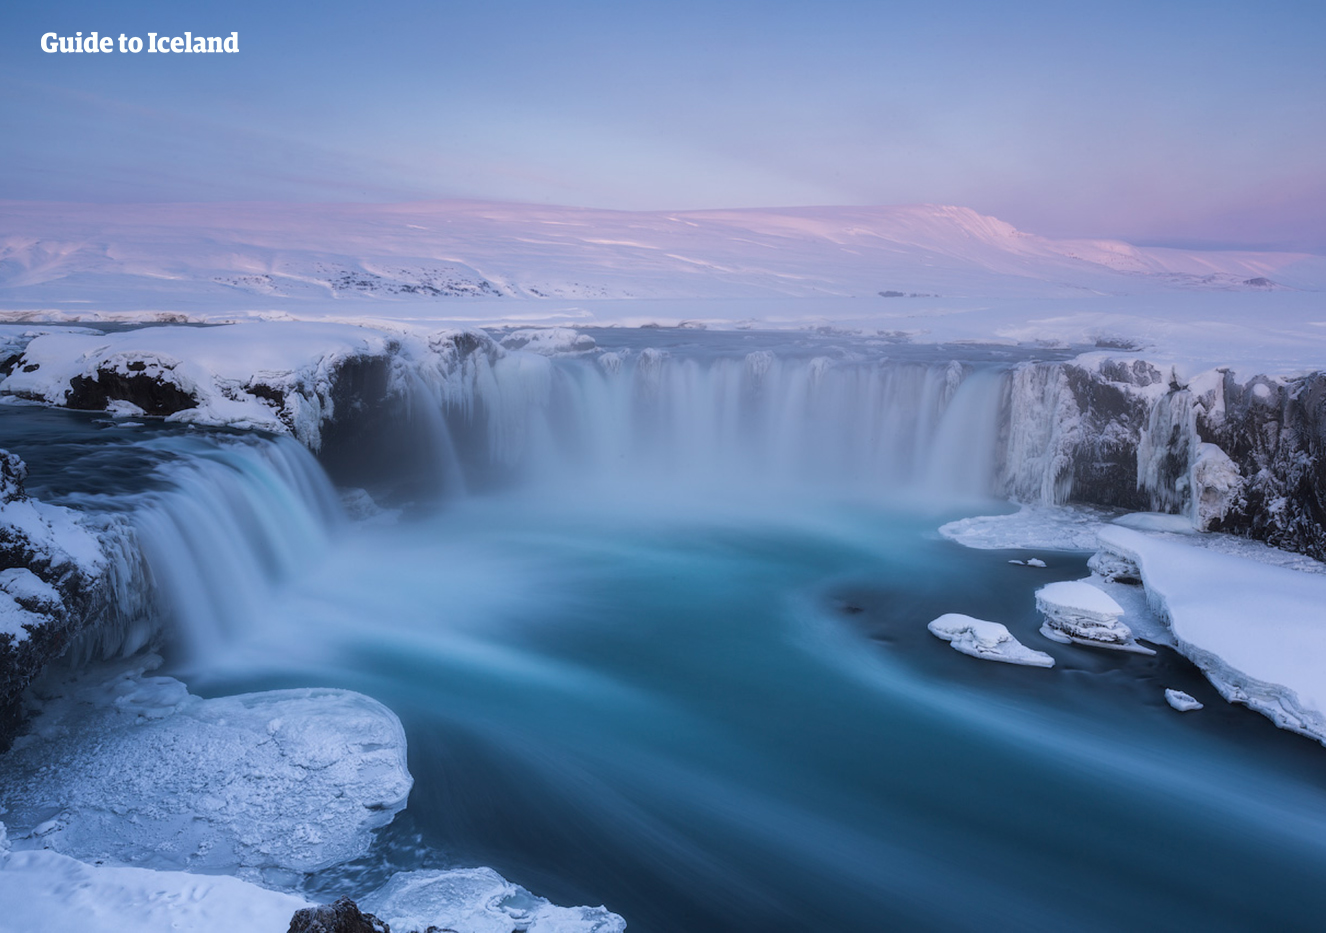 Cast in the pink light of a low winter sun, Goðafoss waterfall fights the freezing elements and continues to flow through the snowy landscapes of north Iceland.